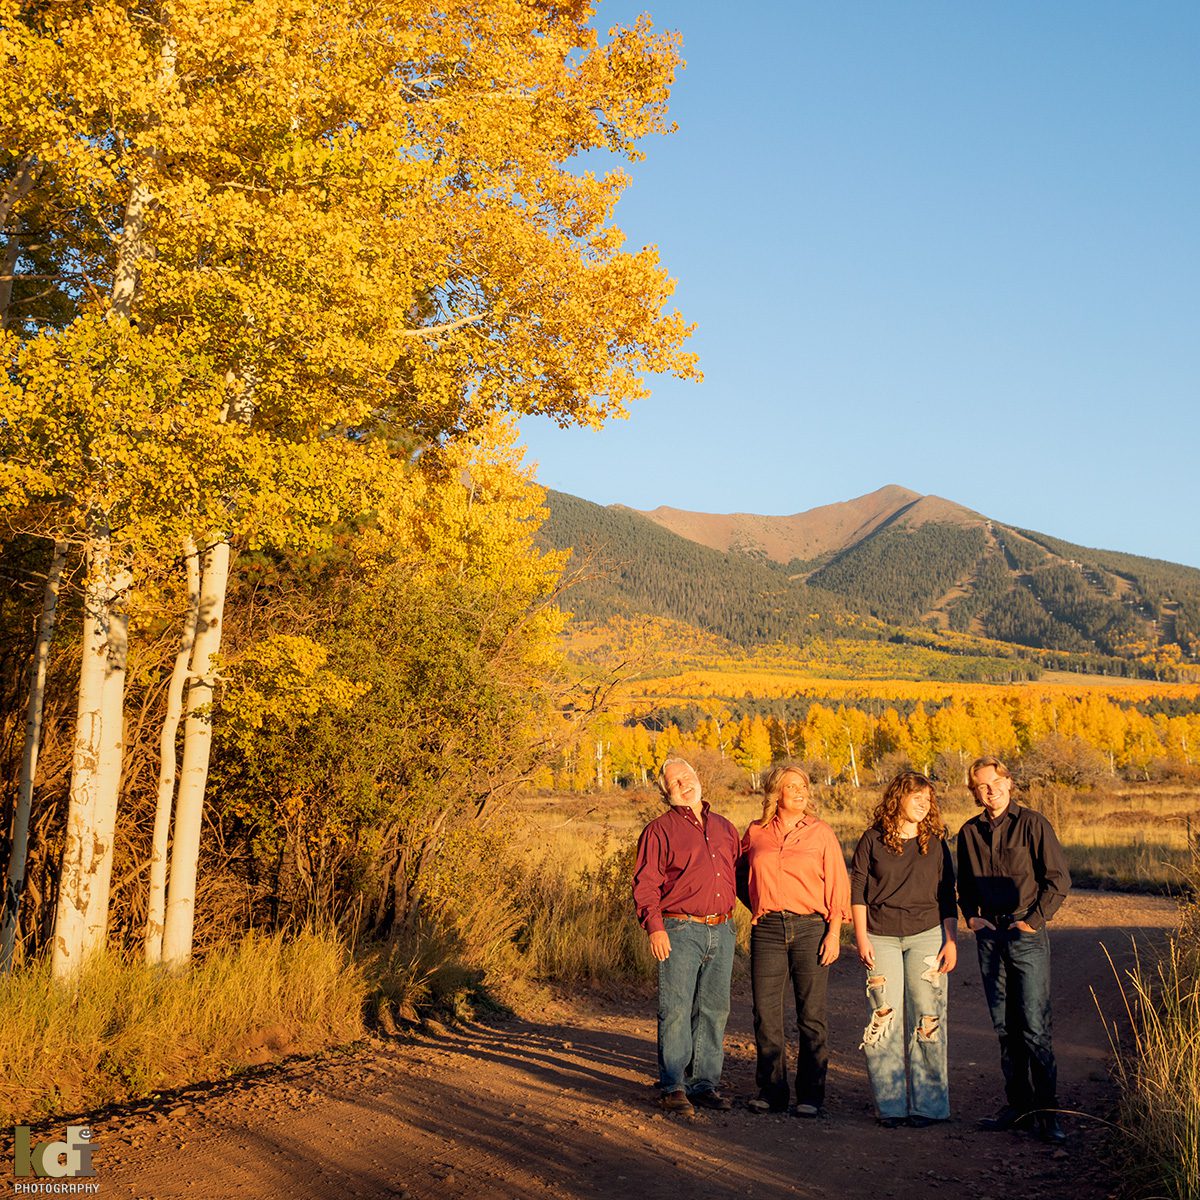 Family Photos in Fall, Golden Aspens in Flagstaff AZ, by KDI Photography.